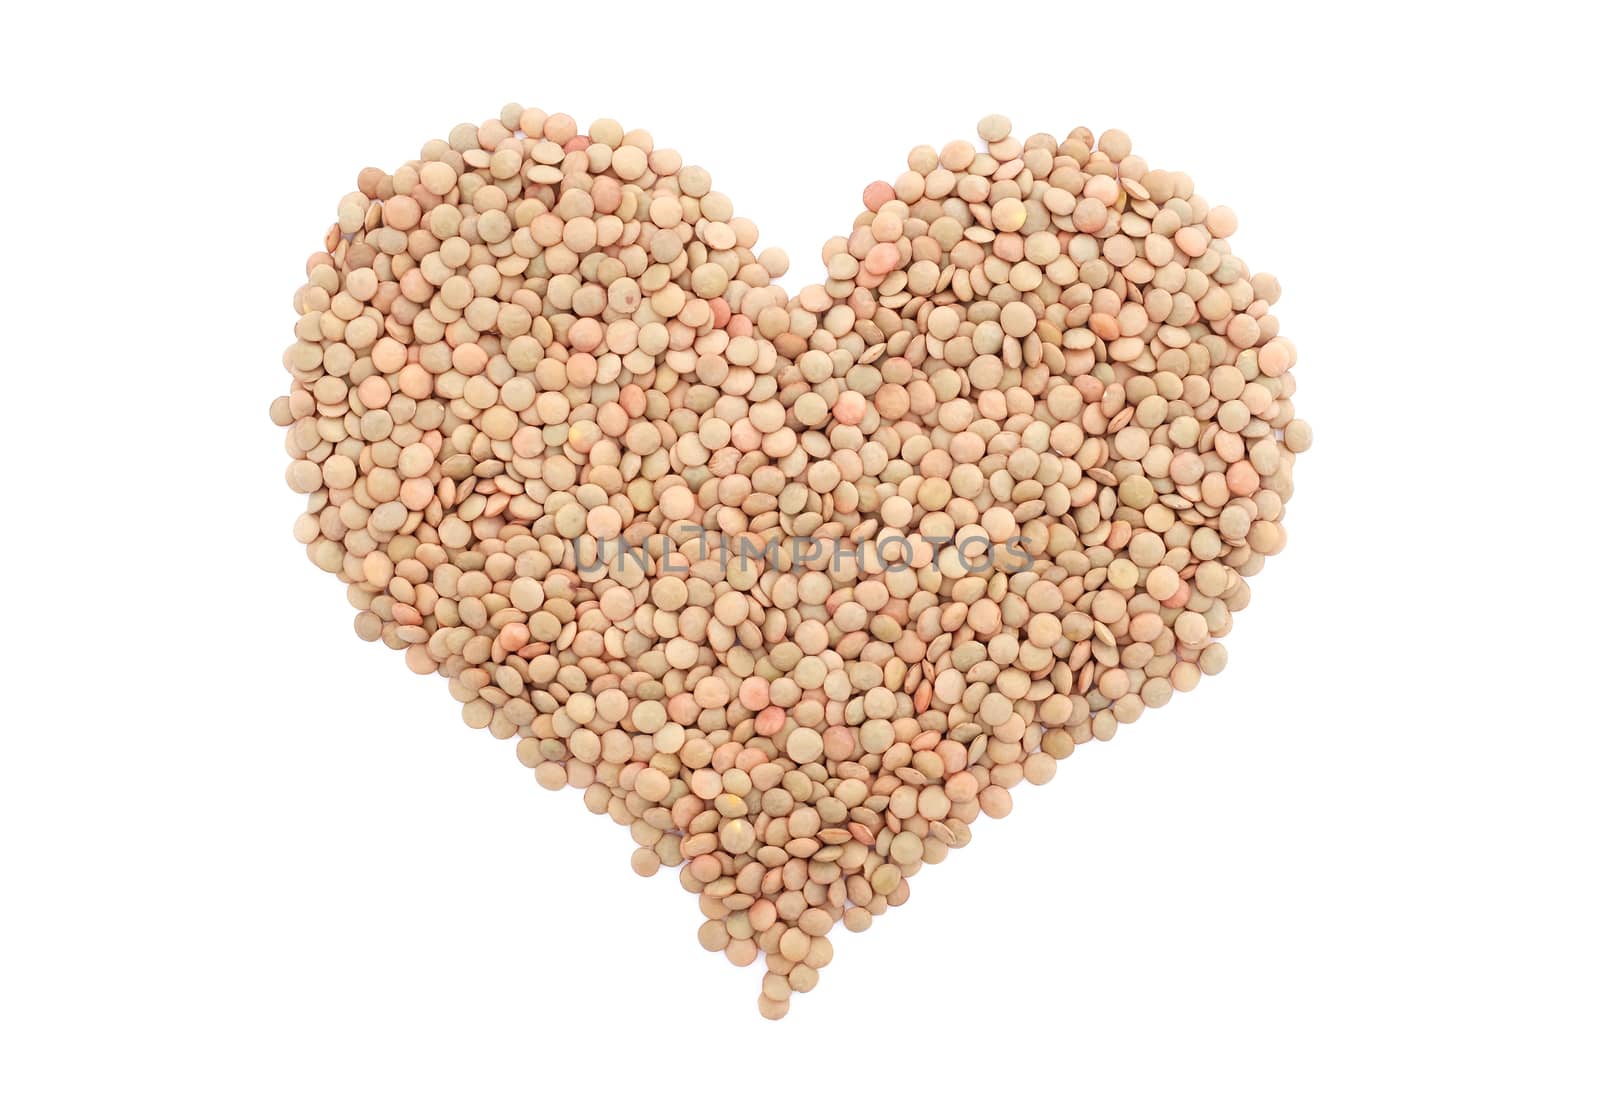 Green lentils in a heart shape, isolated on a white background